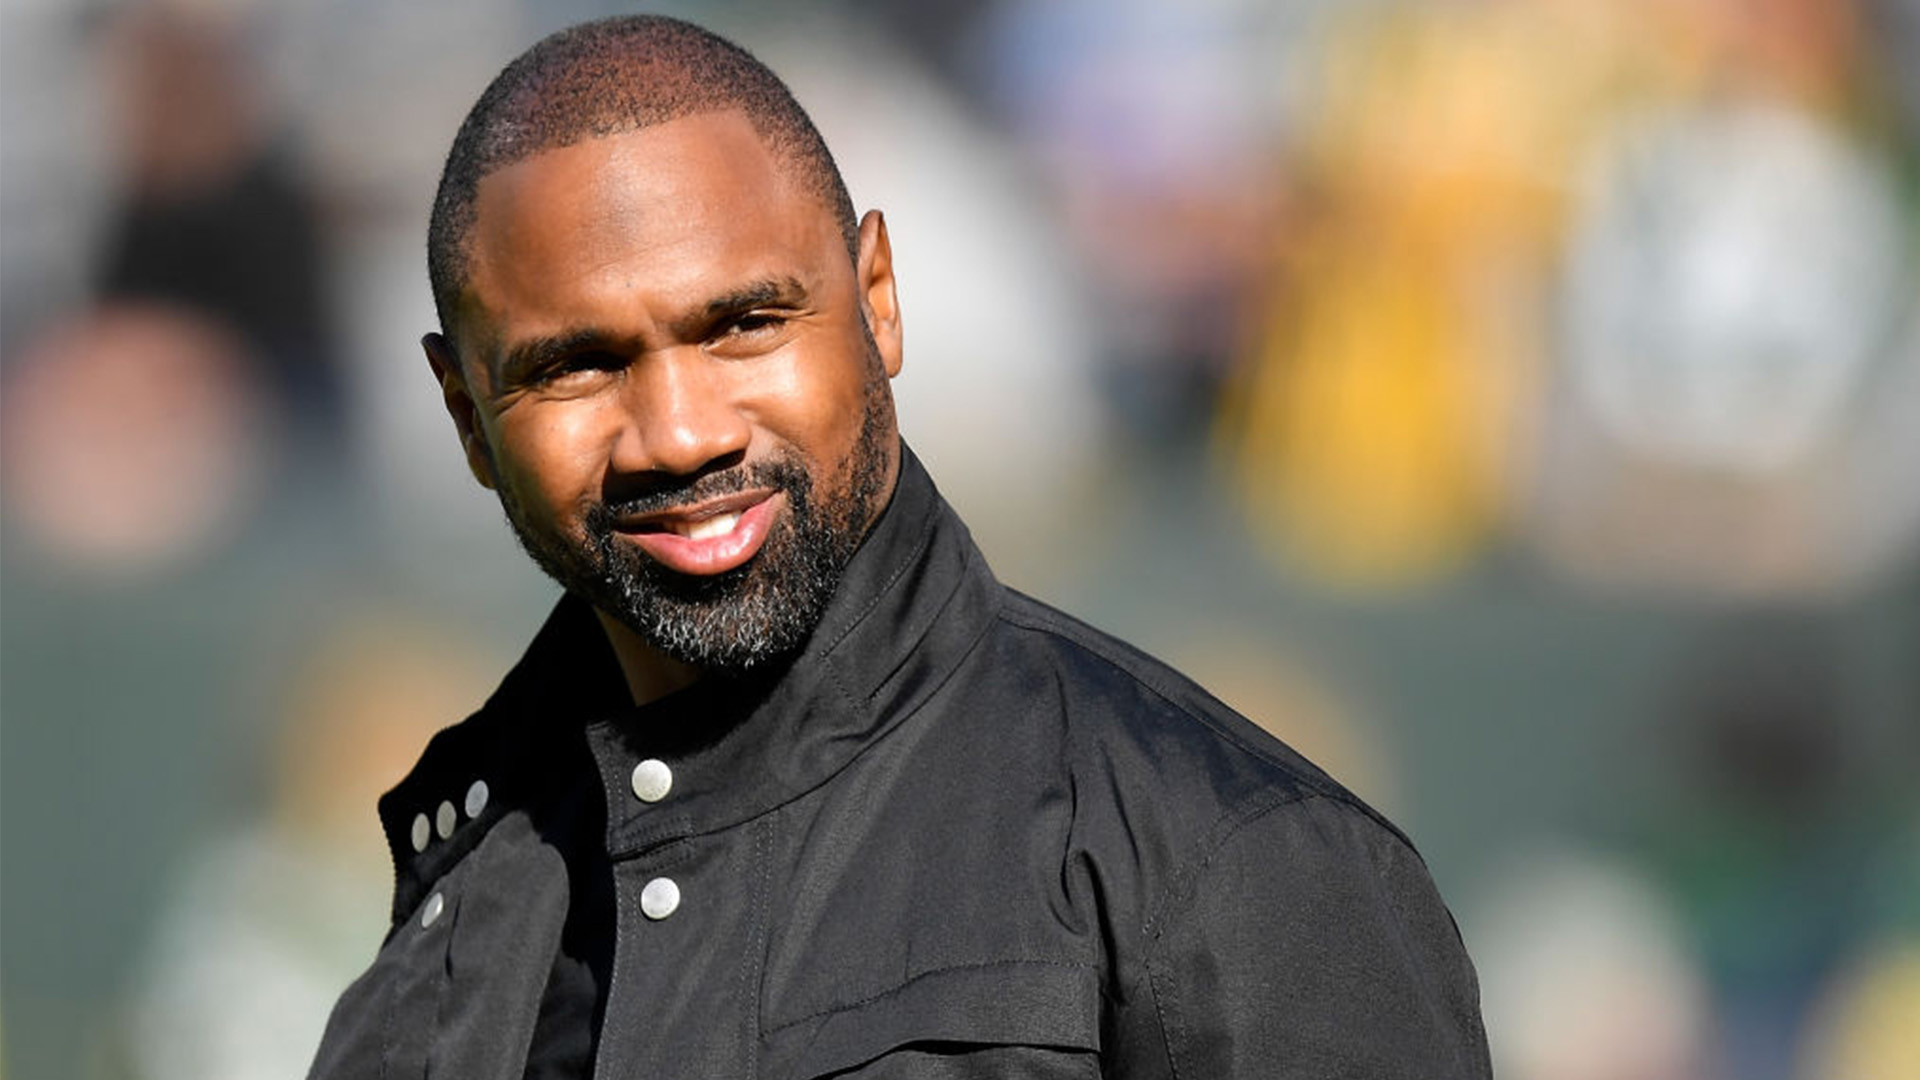 Former NFL Player Charles Woodson Lands Historic Partnership With The Las Vegas Raiders For His Bourbon Company